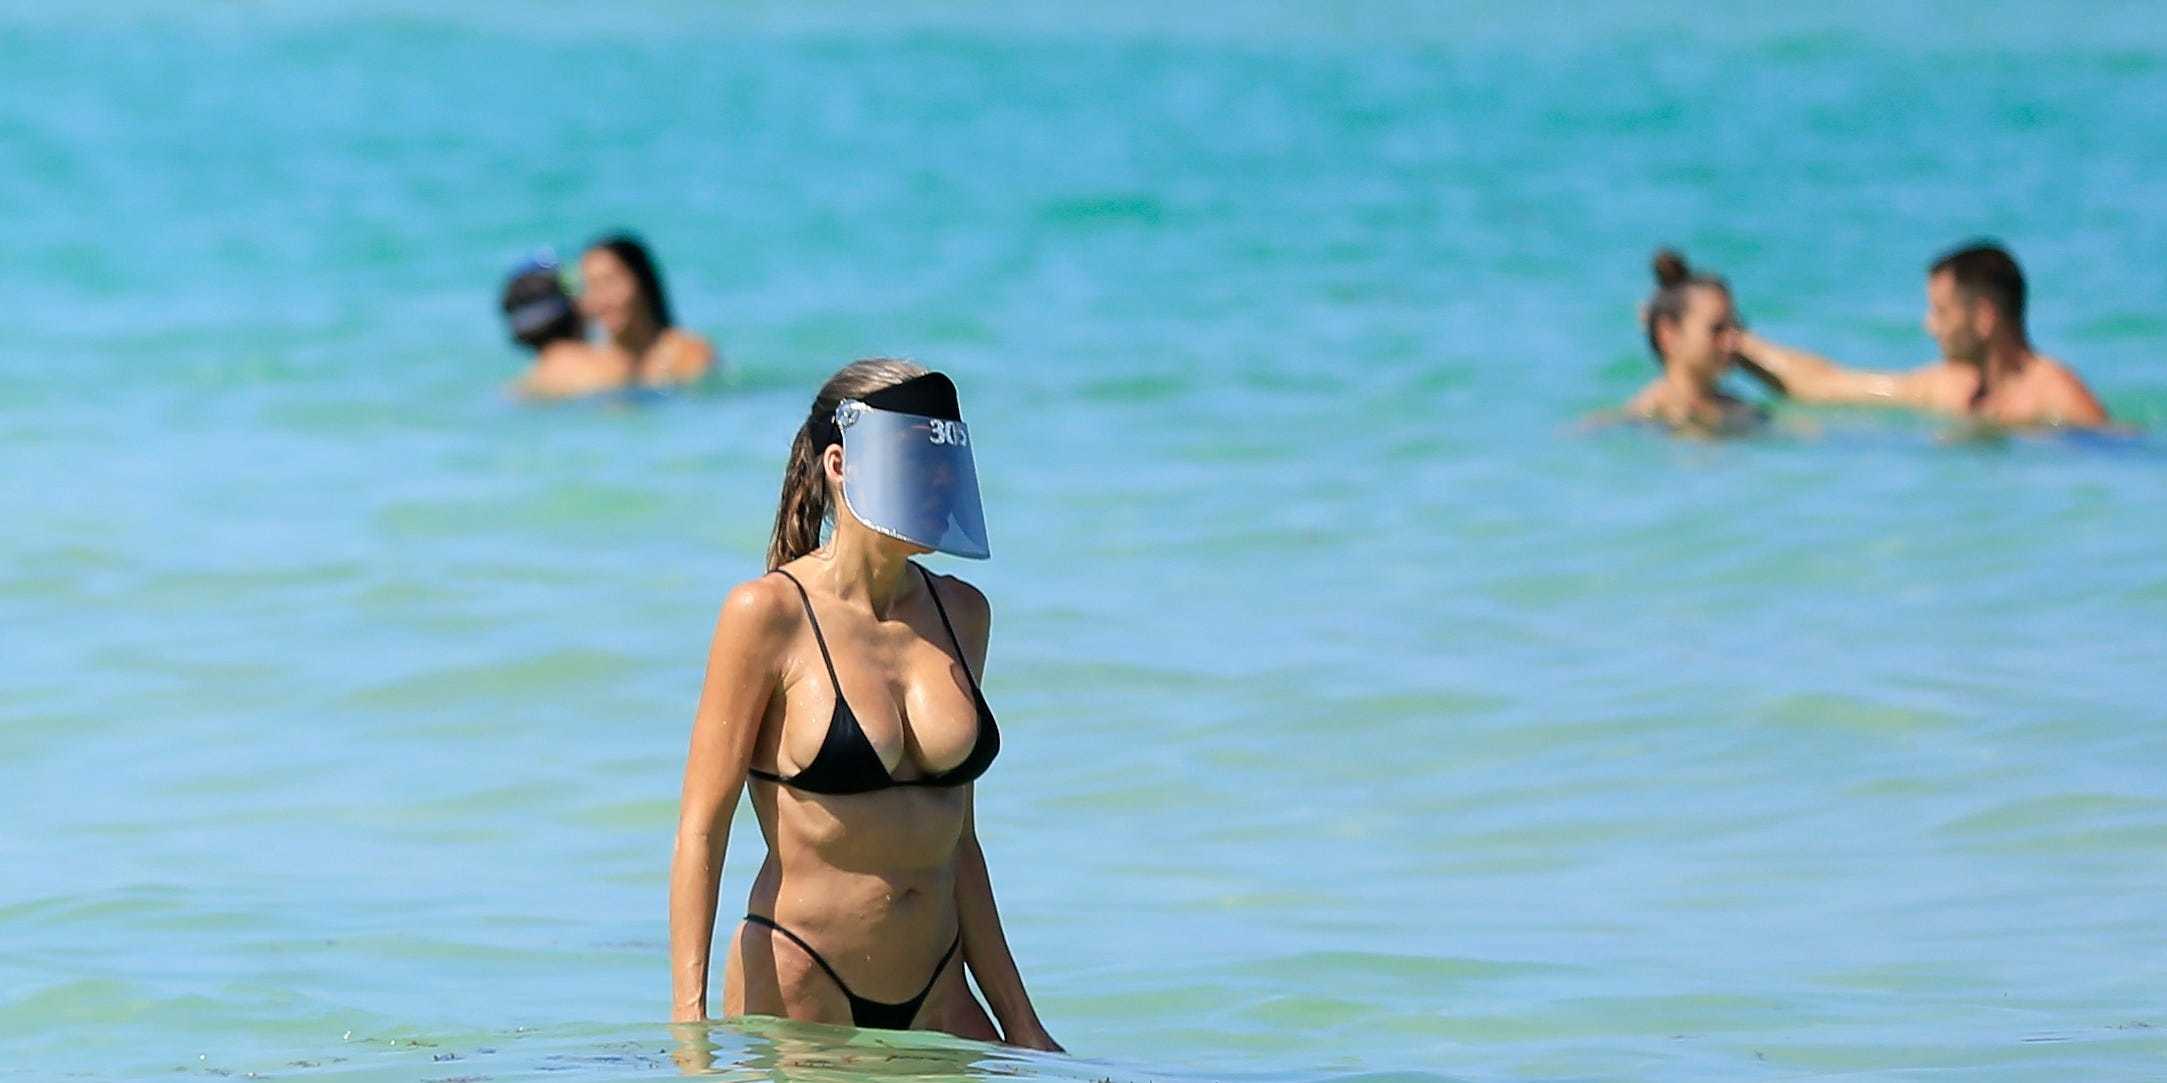 MIAMI BEACH, FLORIDA - JUNE 10: A woman wears a face shield as she wades in the ocean off South Beach on June 10, 2020 in Miami Beach, Florida. Miami-Dade county and the City of Miami opened their beaches today as the area eases restrictions put in place to contain COVID-19. (Photo by Cliff Hawkins/Getty Images)